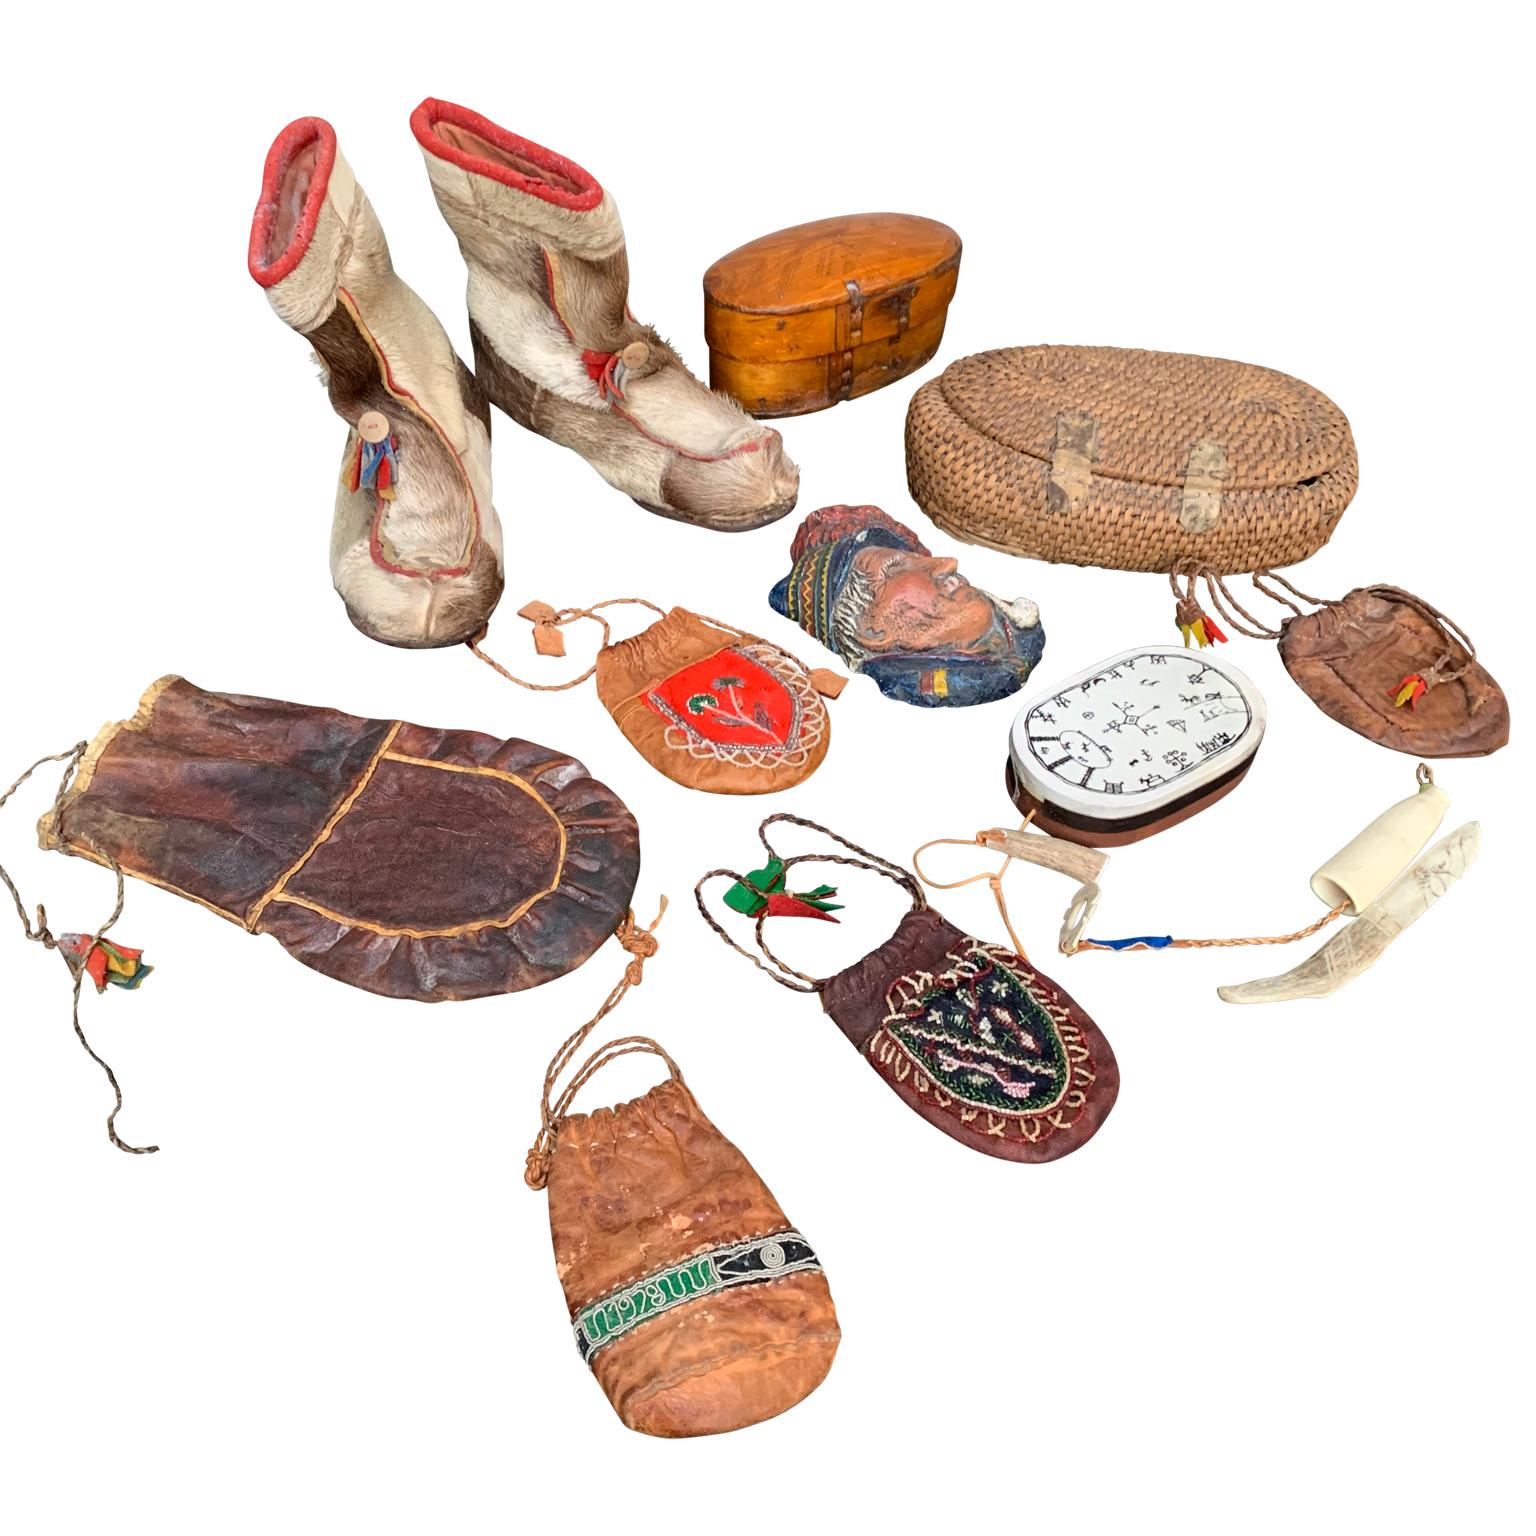 A collection of 11 Swedish pieces handcrafted object from the Northern geographical region of Scandinavia. Most probably from Sweden, but the Lappland area, (where the local native people called Sami still live by old traditions and costumes),